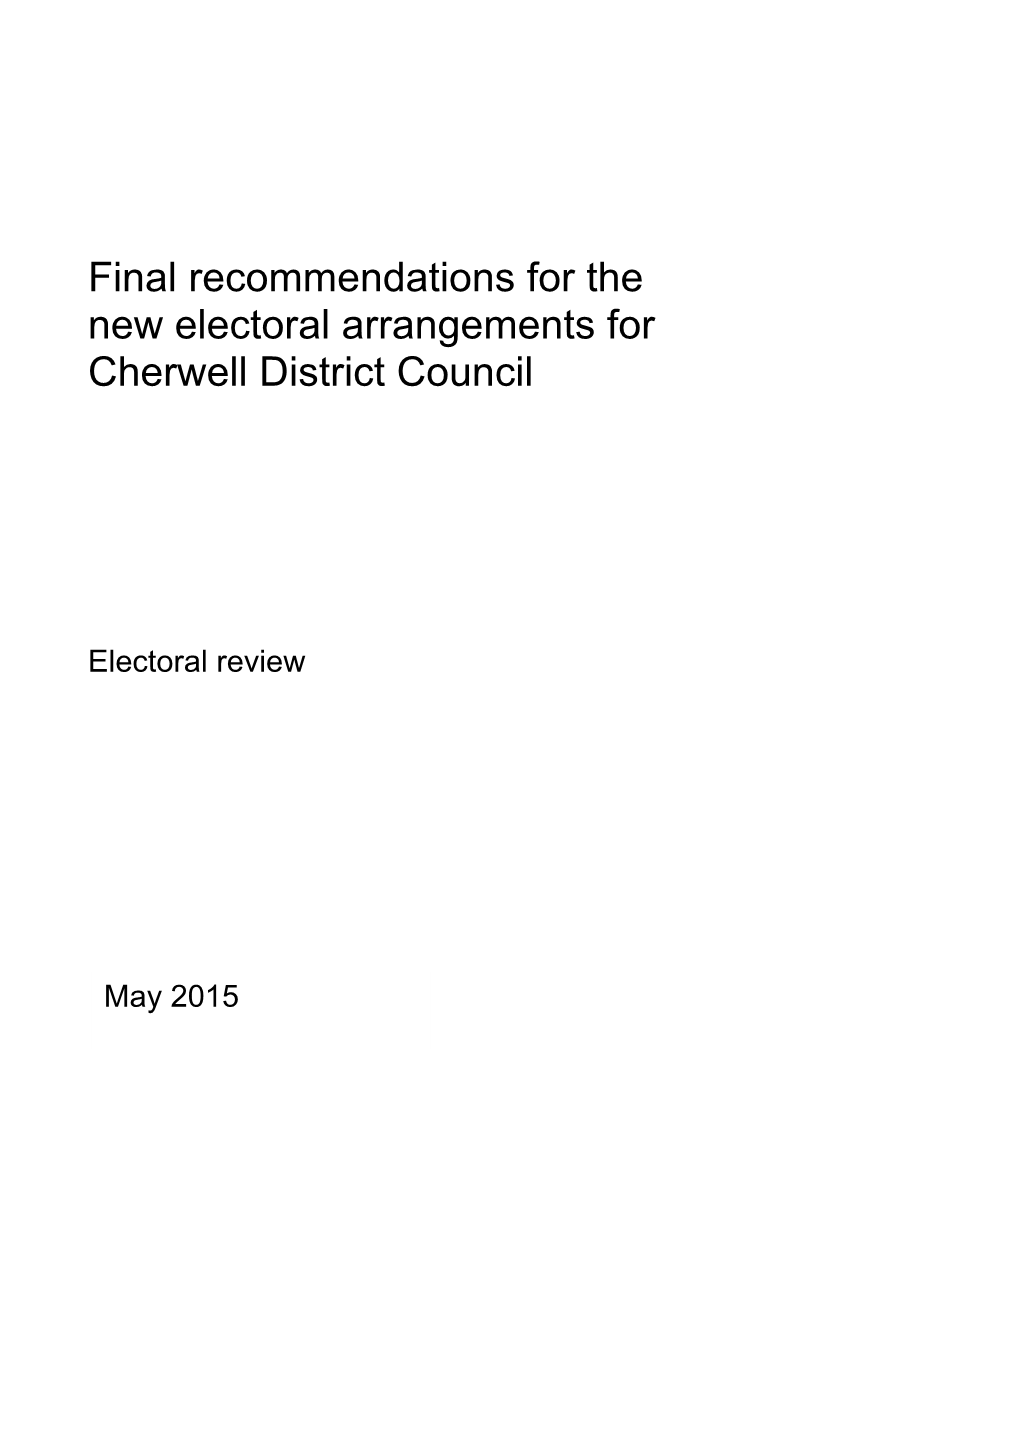 Final Recommendations for the New Electoral Arrangements for Cherwell District Council